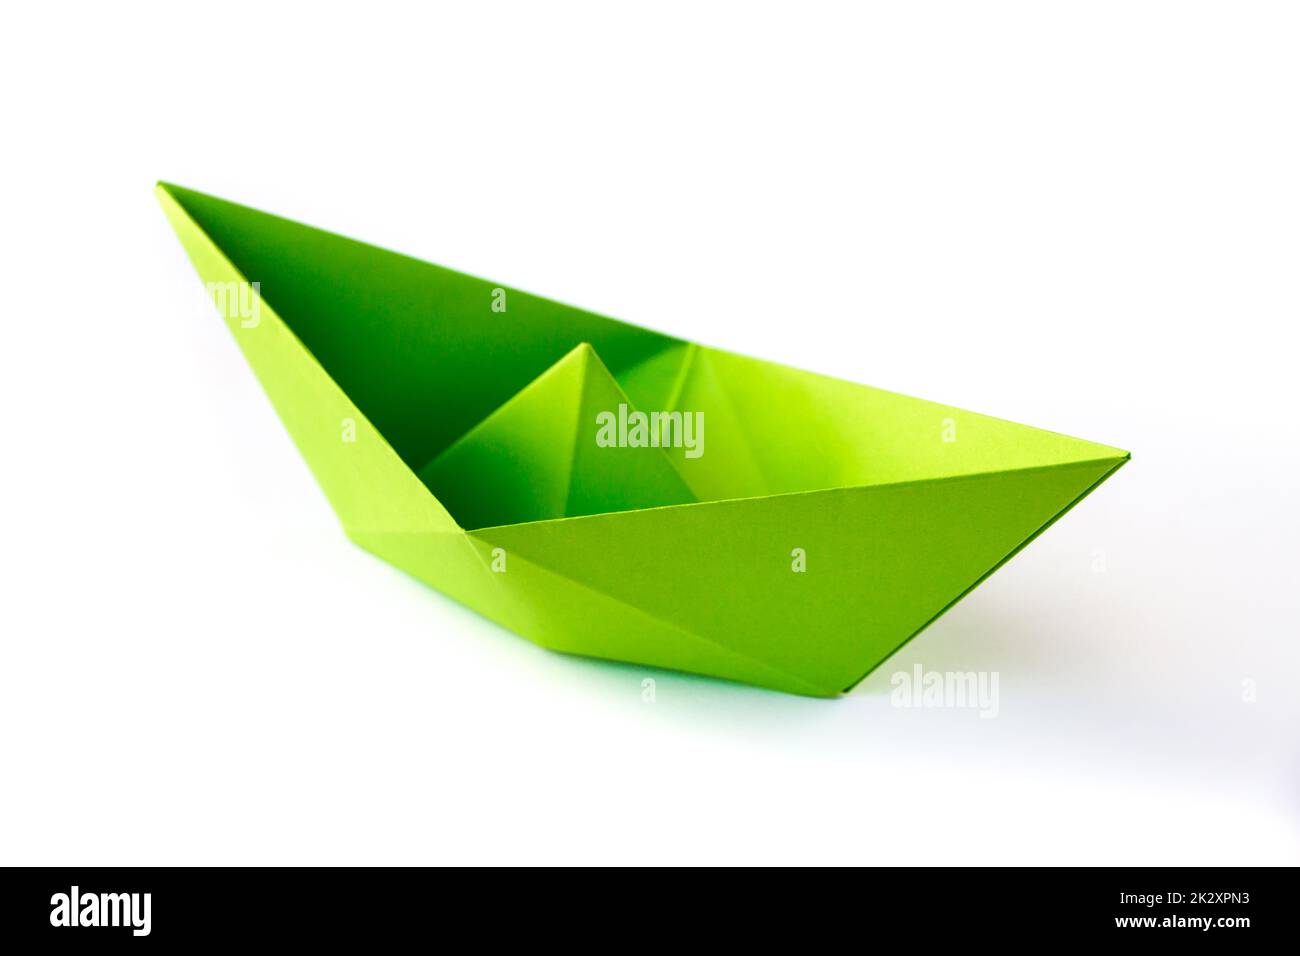 Green paper boat origami isolated on a white background Stock Photo